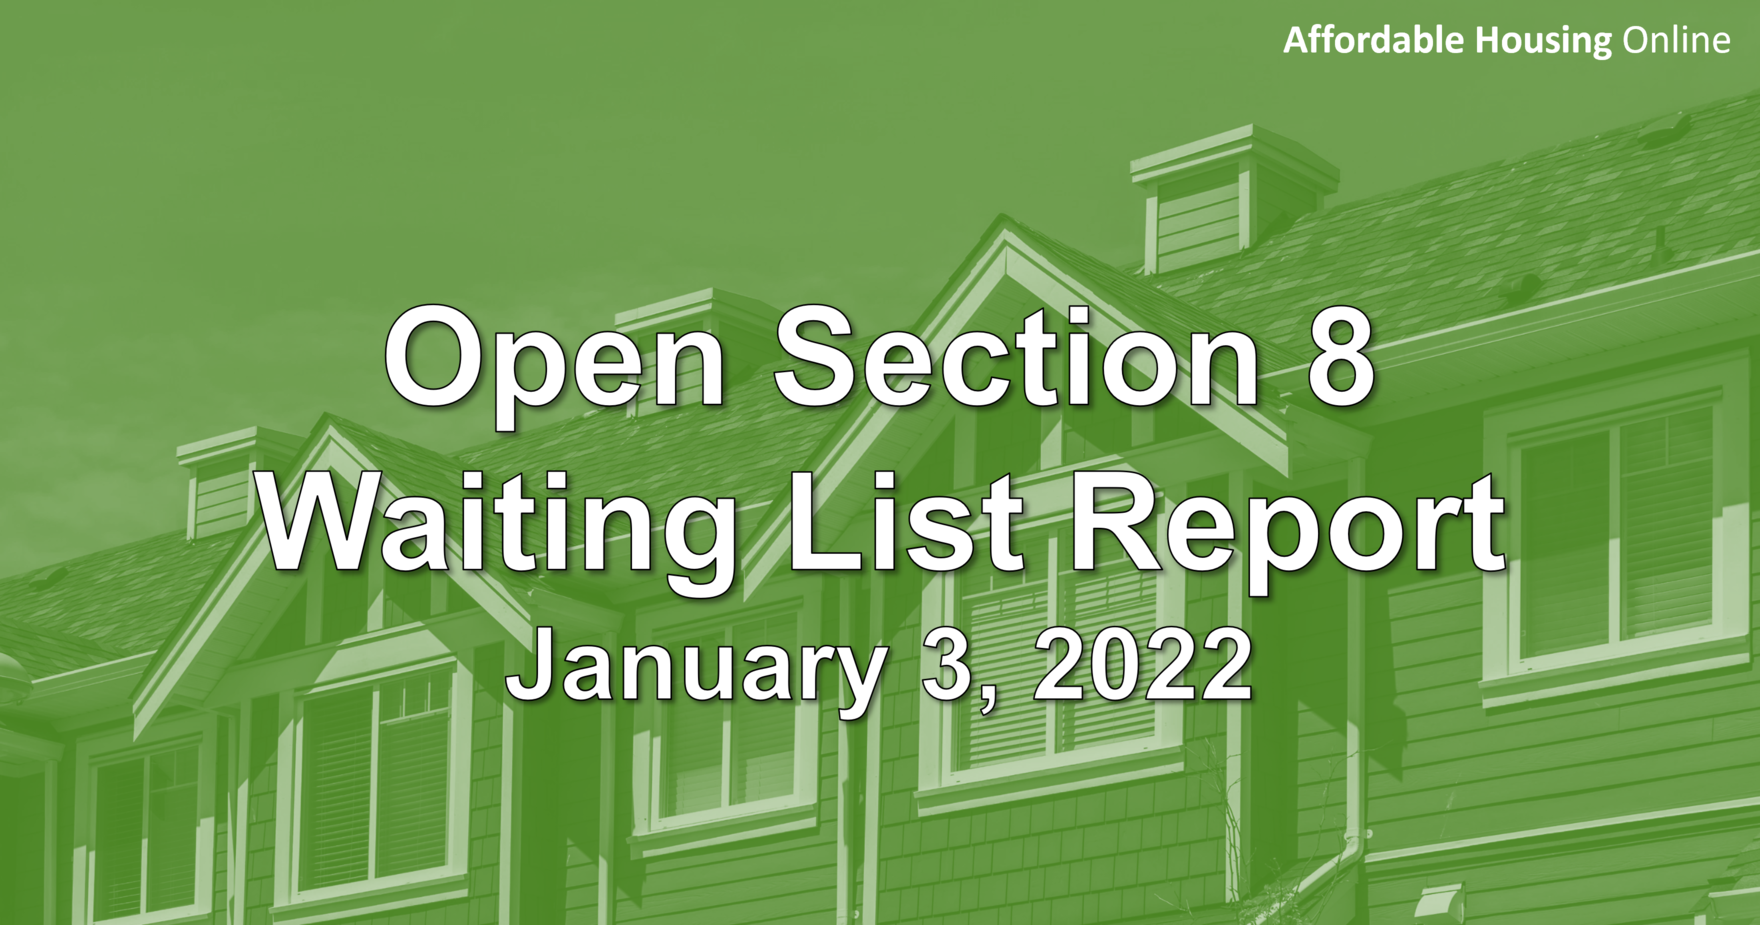 Open Section 8 Waiting List Report: January 3, 2022